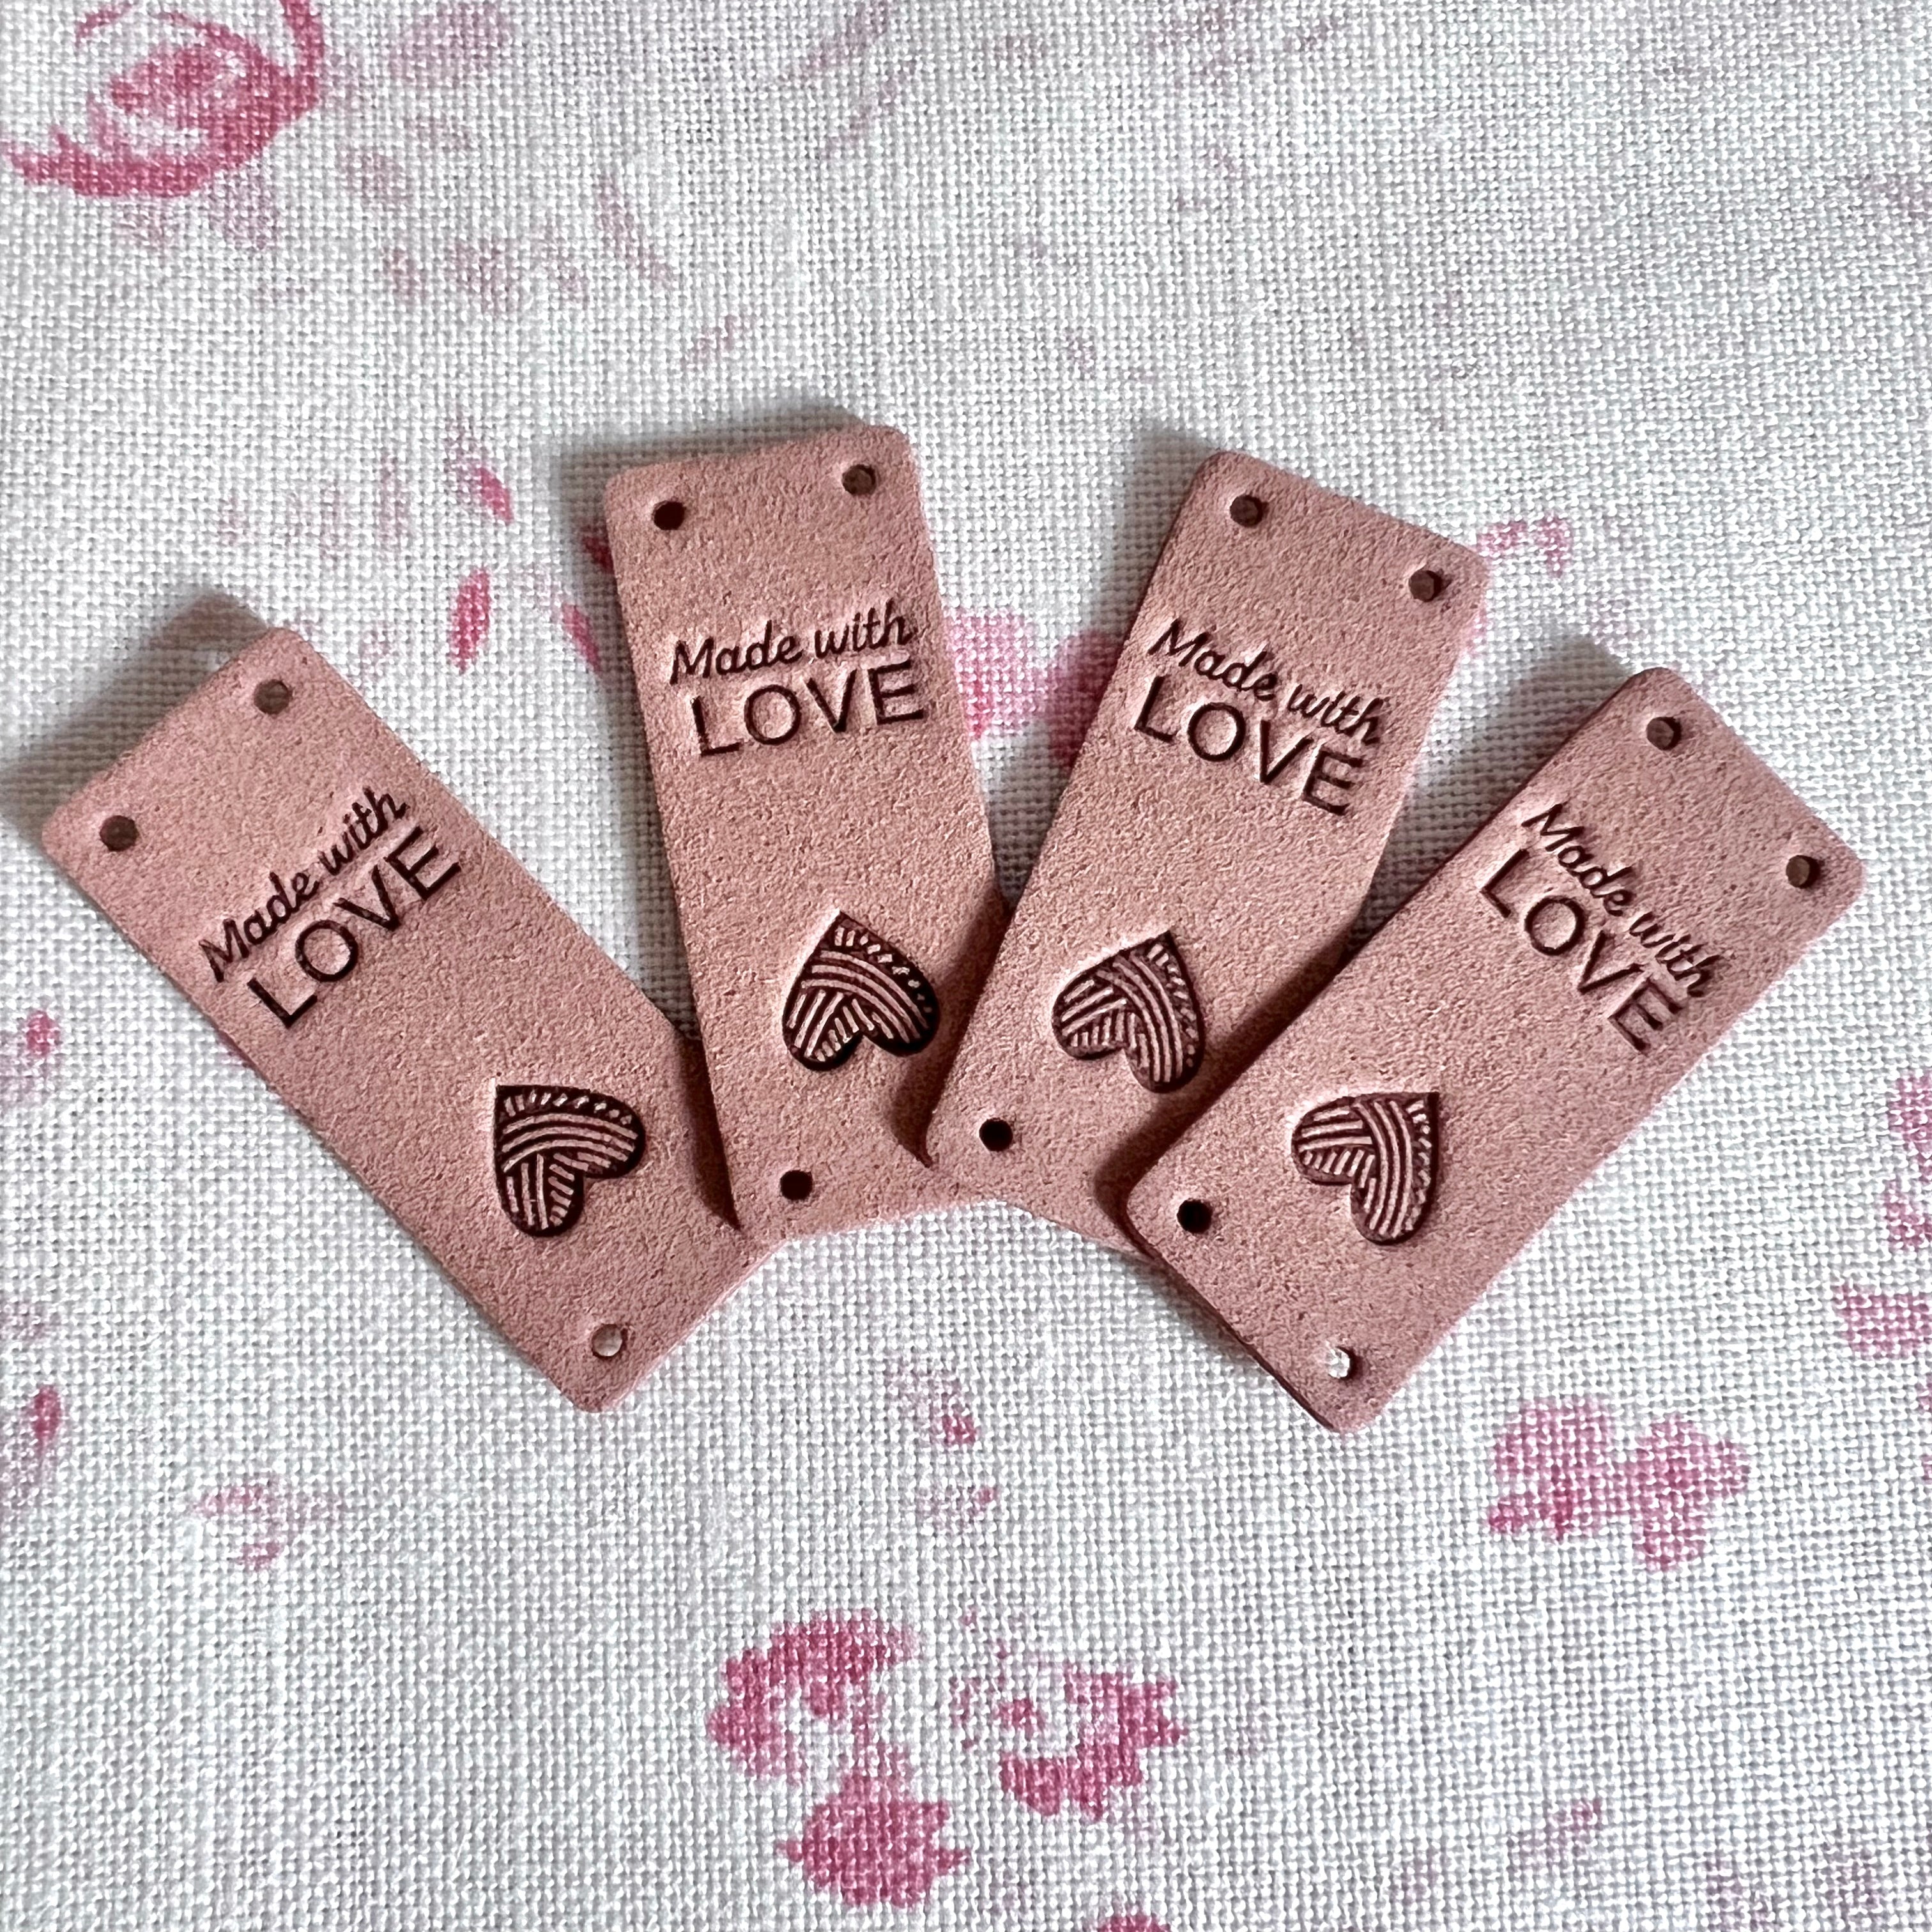 20Pcs Tags Handmade With Love Labels Clothing Tags DIY Crafts Sewing  56*1_cd